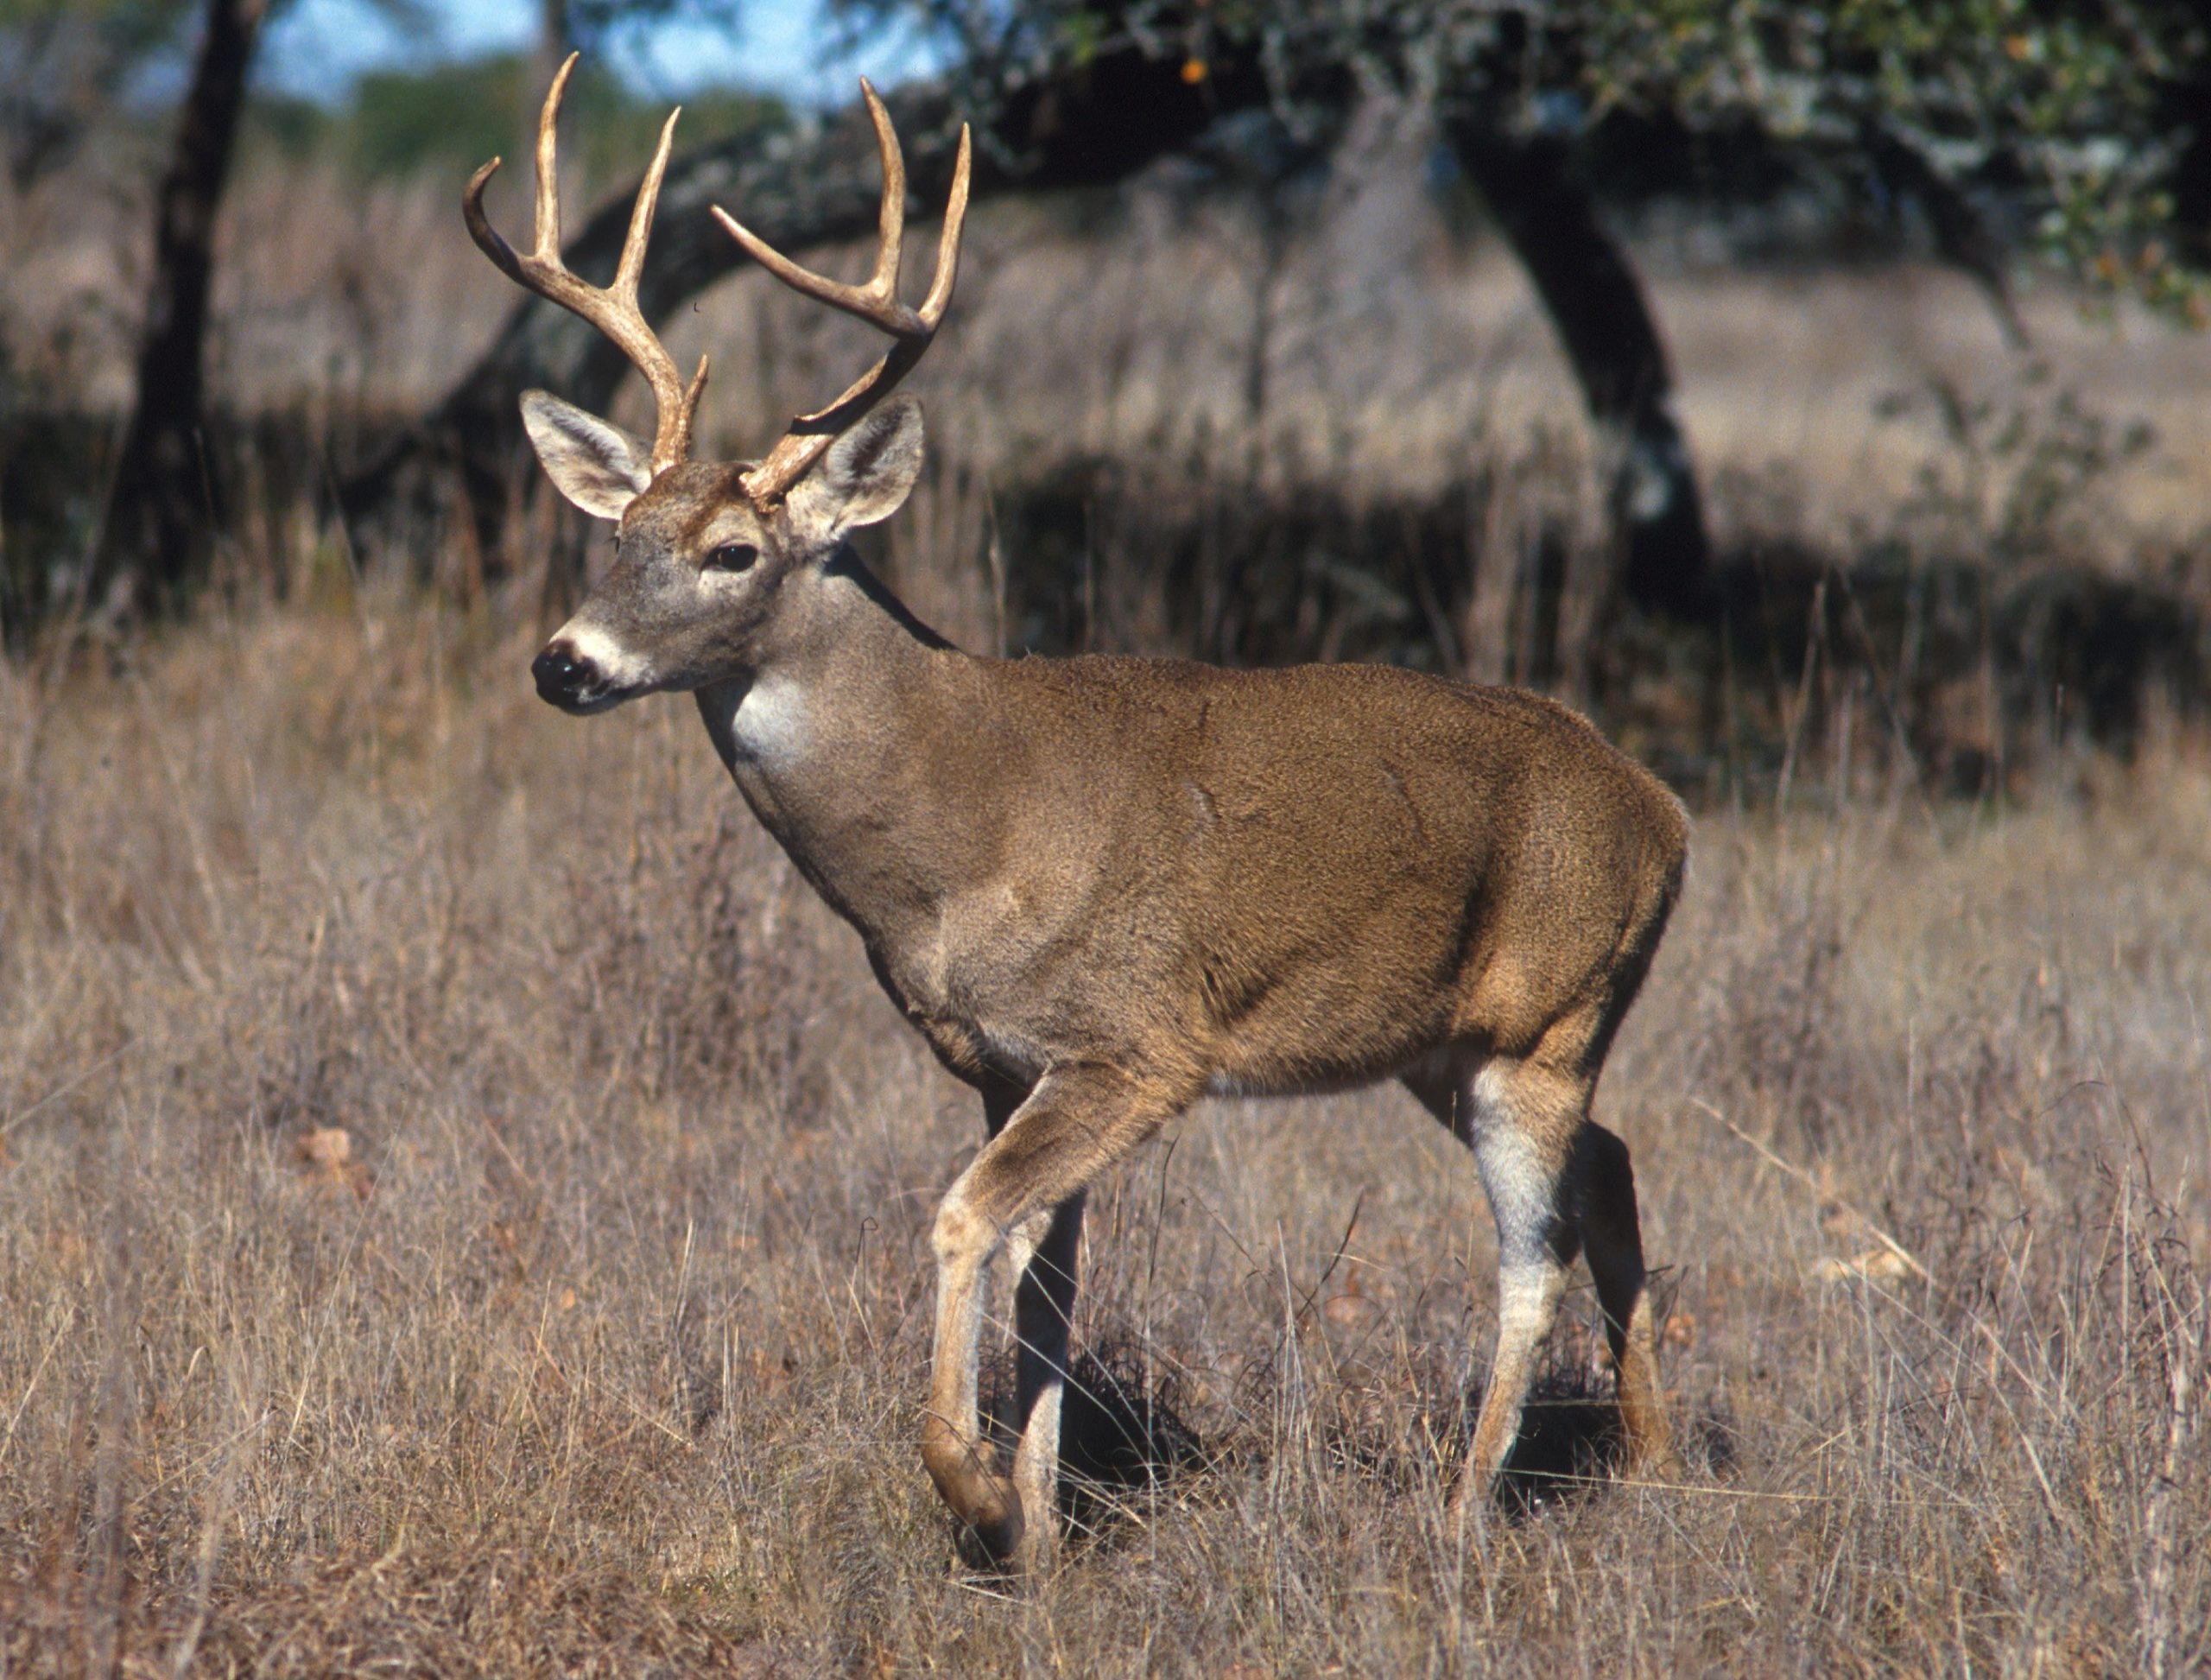 Pth - How Has The Warm Weather Affected Hunting Season For You?  Nys Rut 2021